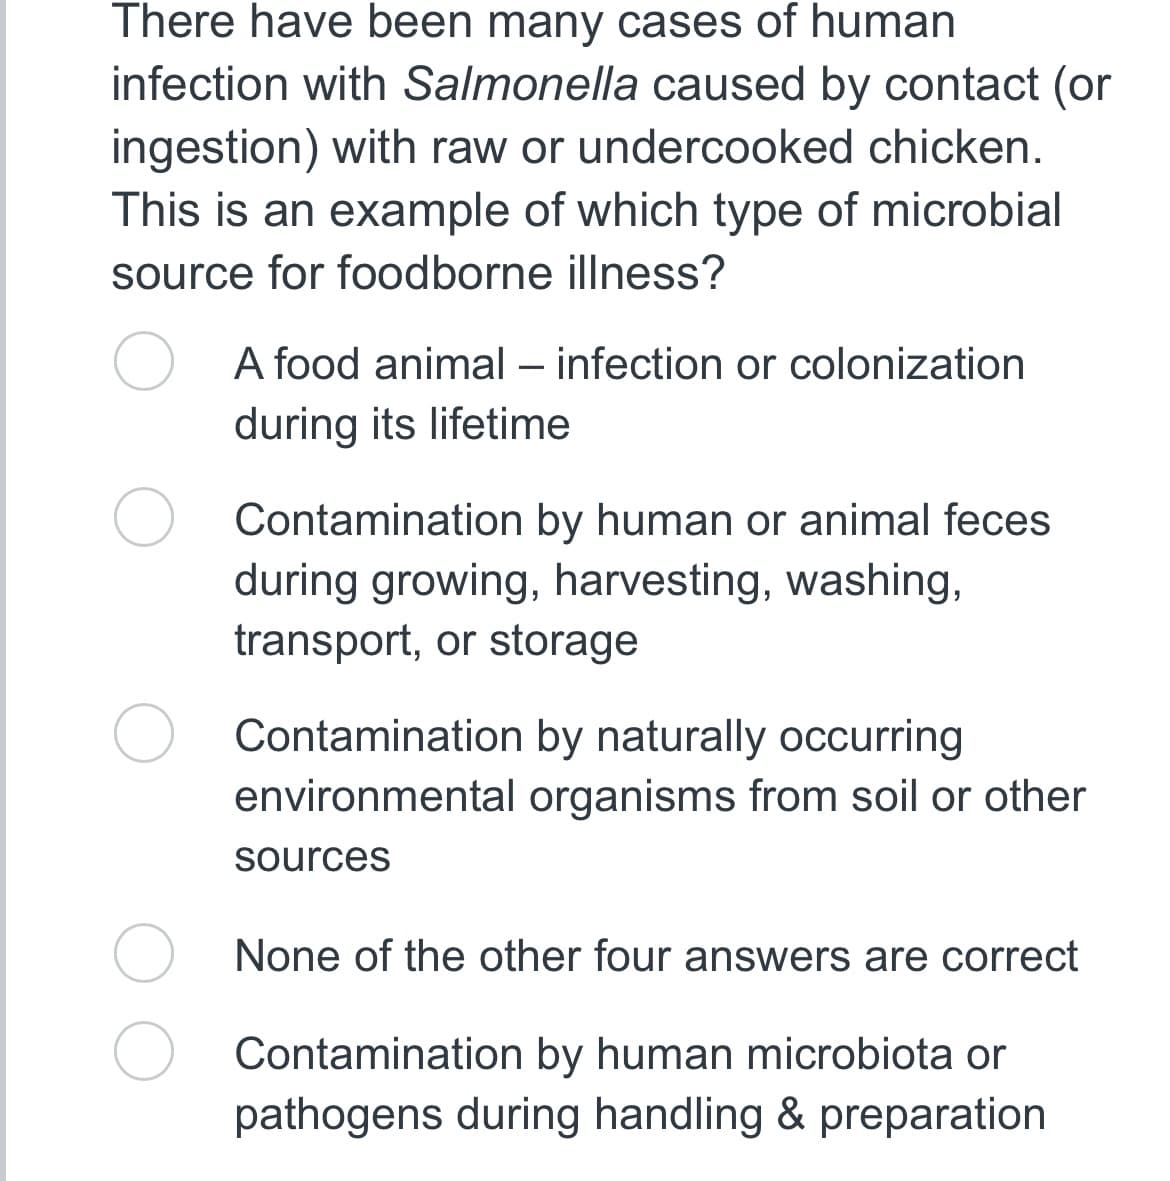 There have been many cases of human
infection with Salmonella caused by contact (or
ingestion) with raw or undercooked chicken.
This is an example of which type of microbial
source for foodborne illness?
A food animal - infection or colonization
during its lifetime
Contamination by human or animal feces
during growing, harvesting, washing,
transport, or storage
Contamination by naturally occurring
environmental organisms from soil or other
sources
None of the other four answers are correct
Contamination by human microbiota or
pathogens during handling & preparation